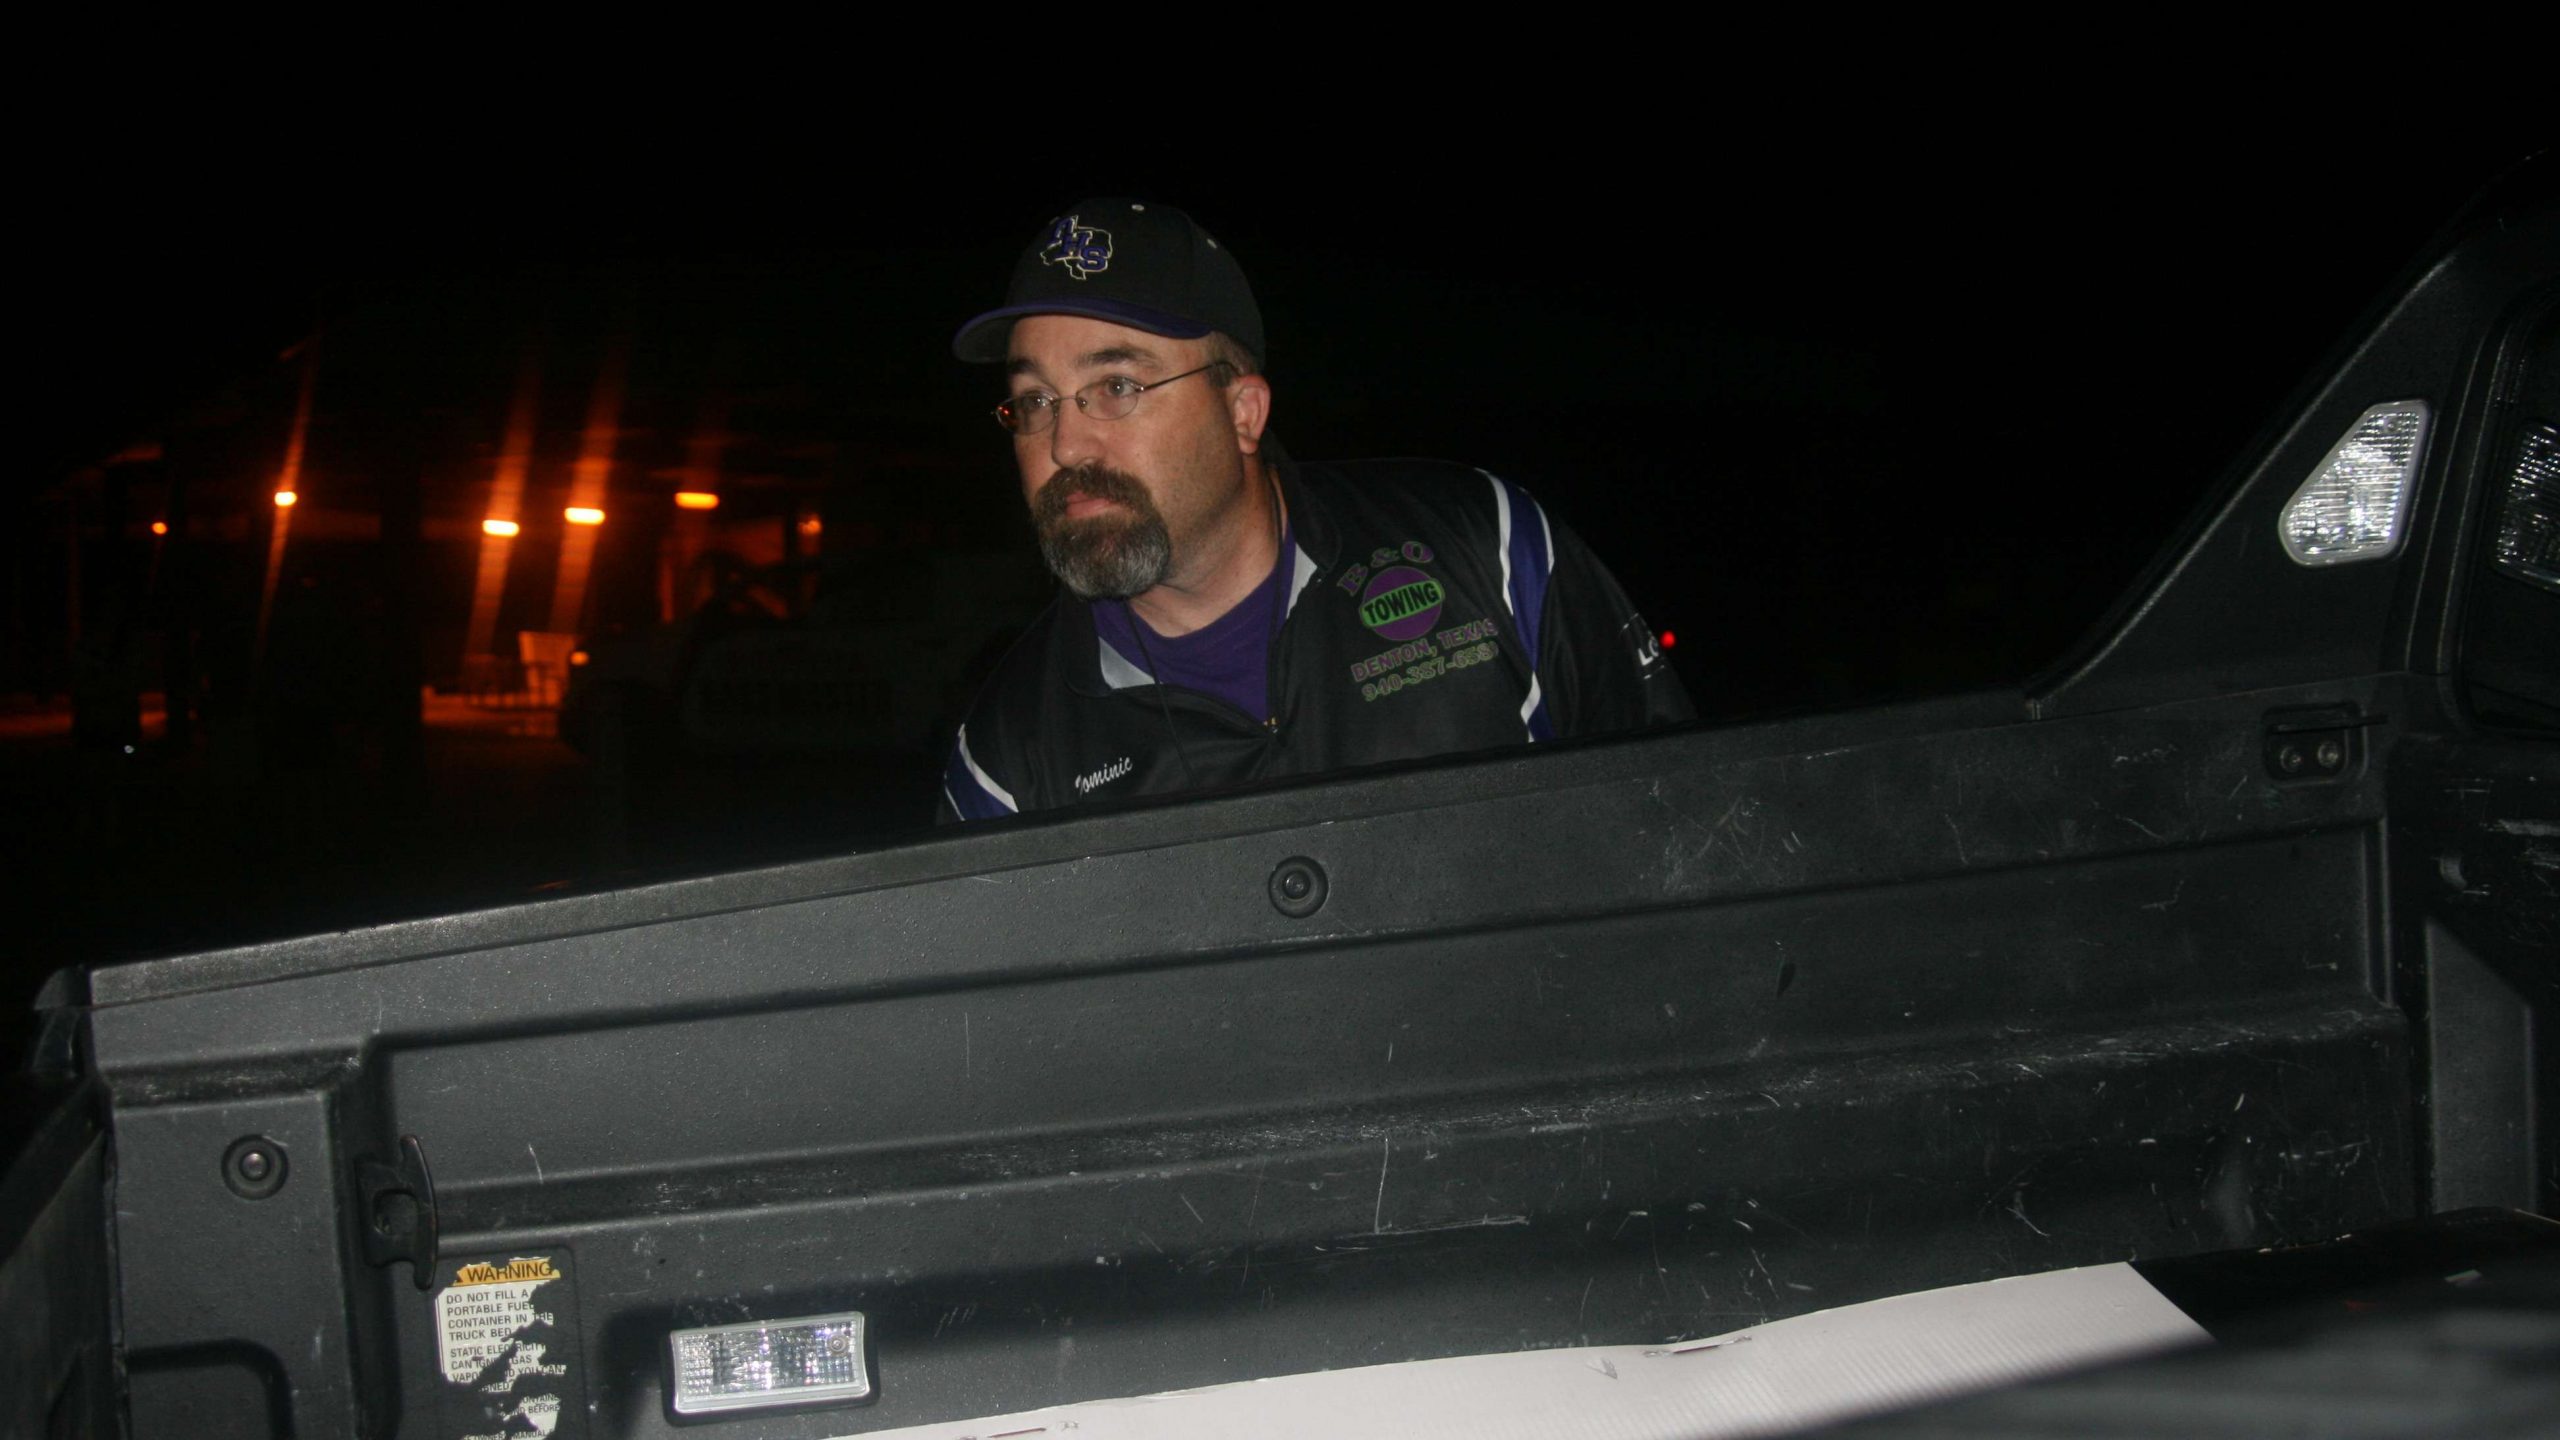 Dominic Falcinelli, the Denton High coach, gets ready to back down the team in the early morning hours.